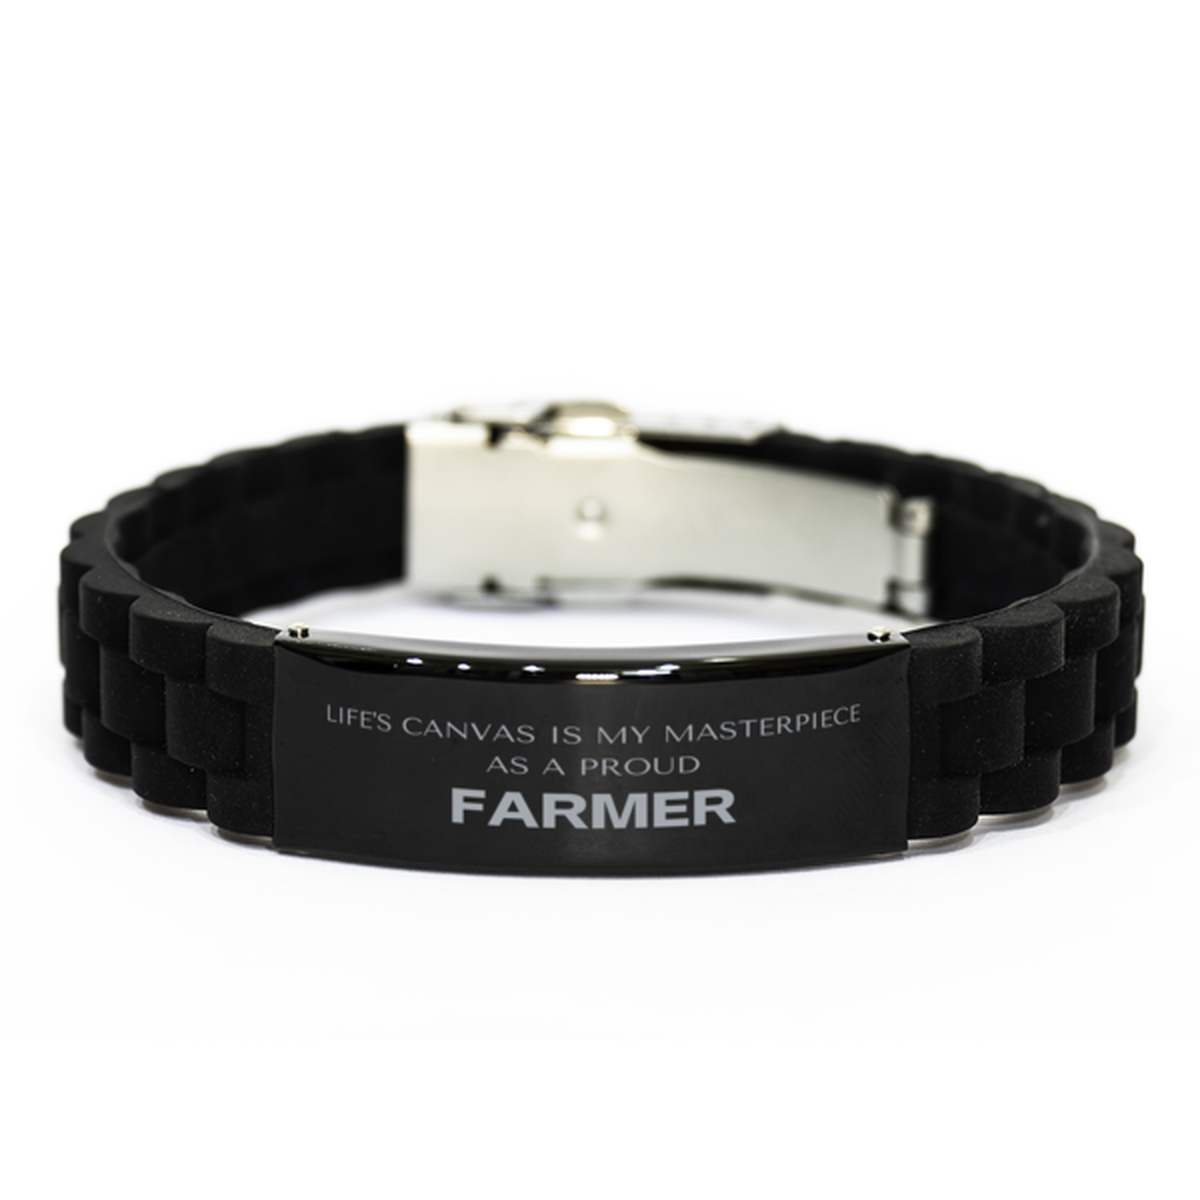 Proud Farmer Gifts, Life's canvas is my masterpiece, Epic Birthday Christmas Unique Black Glidelock Clasp Bracelet For Farmer, Coworkers, Men, Women, Friends